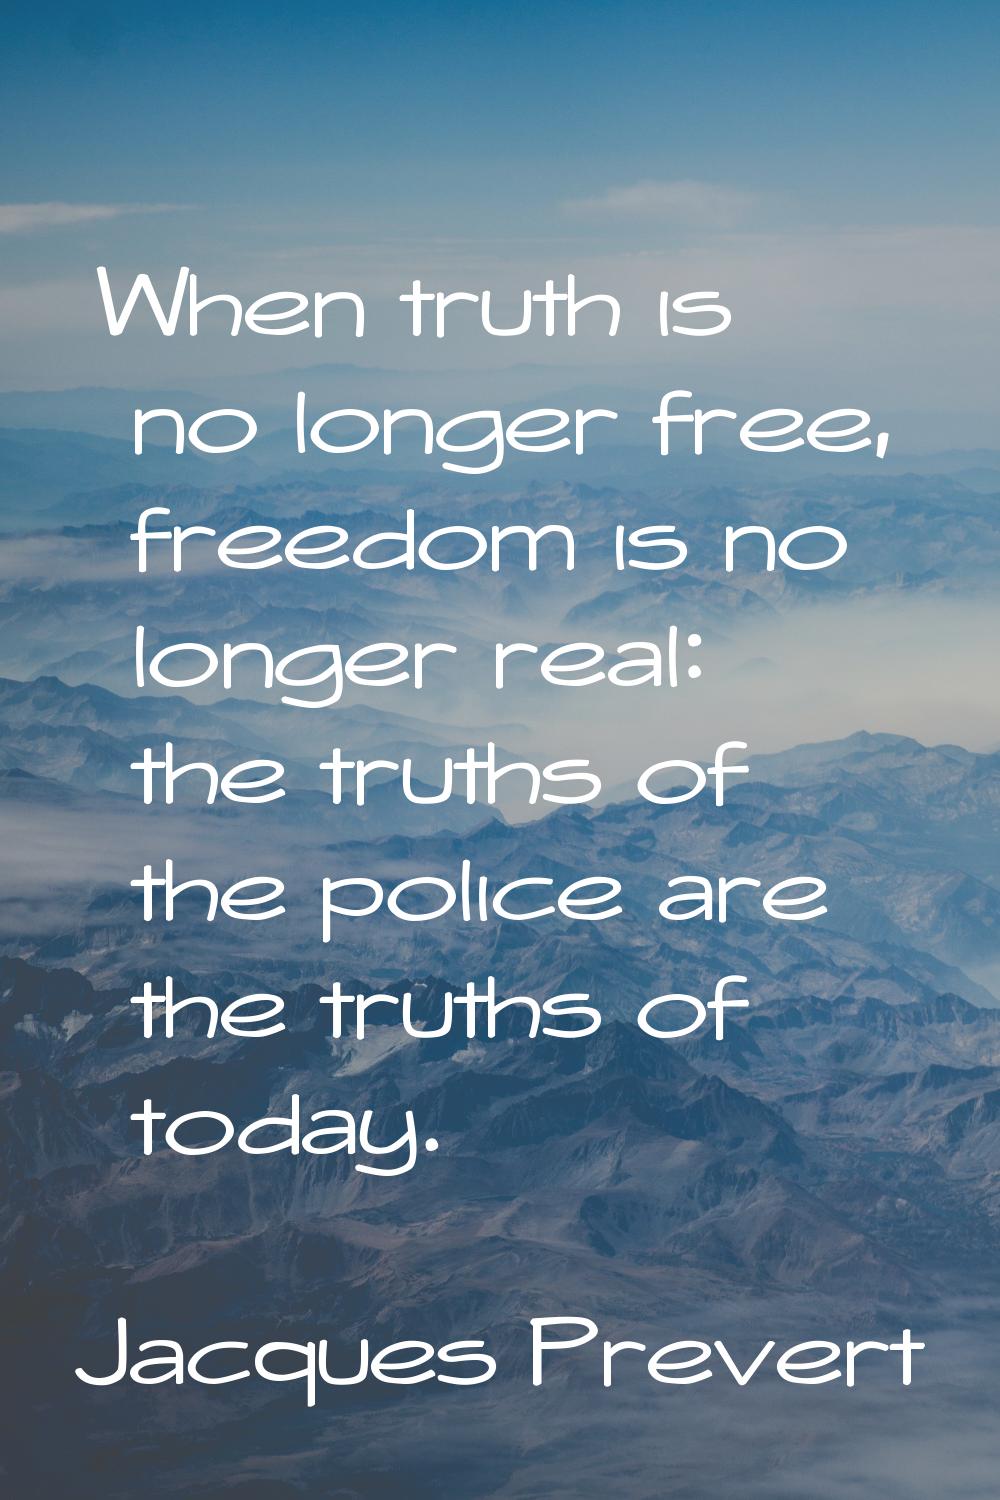 When truth is no longer free, freedom is no longer real: the truths of the police are the truths of